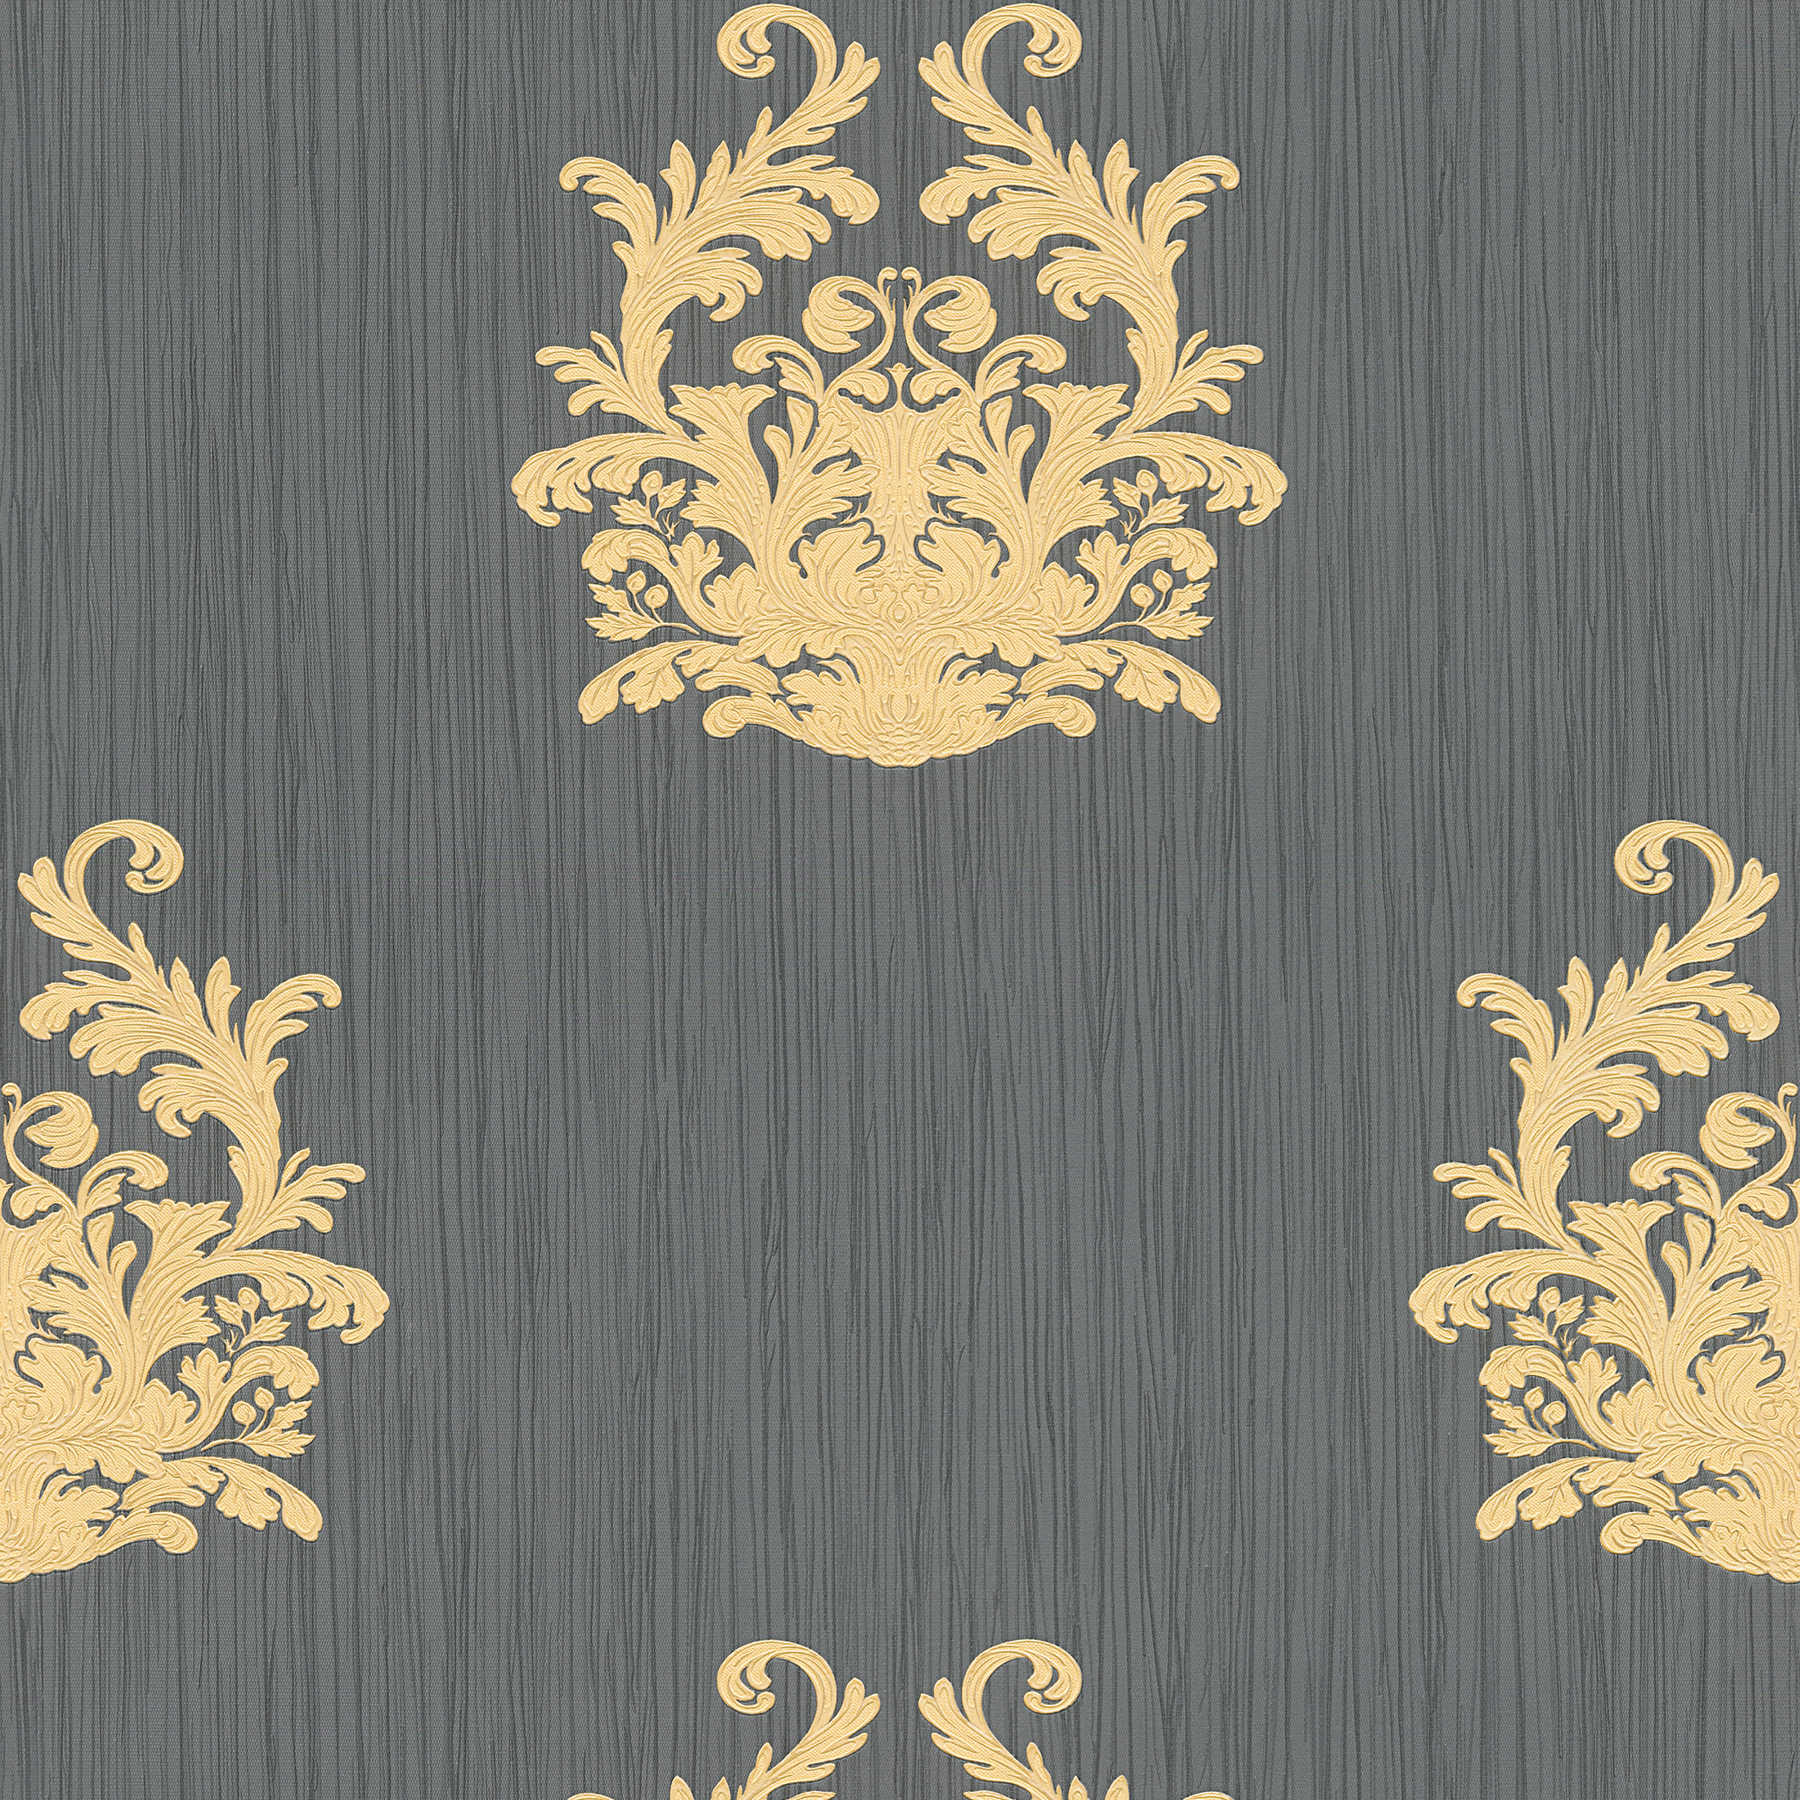 Black textile wallpaper with gold emblem with filigree embossed pattern
